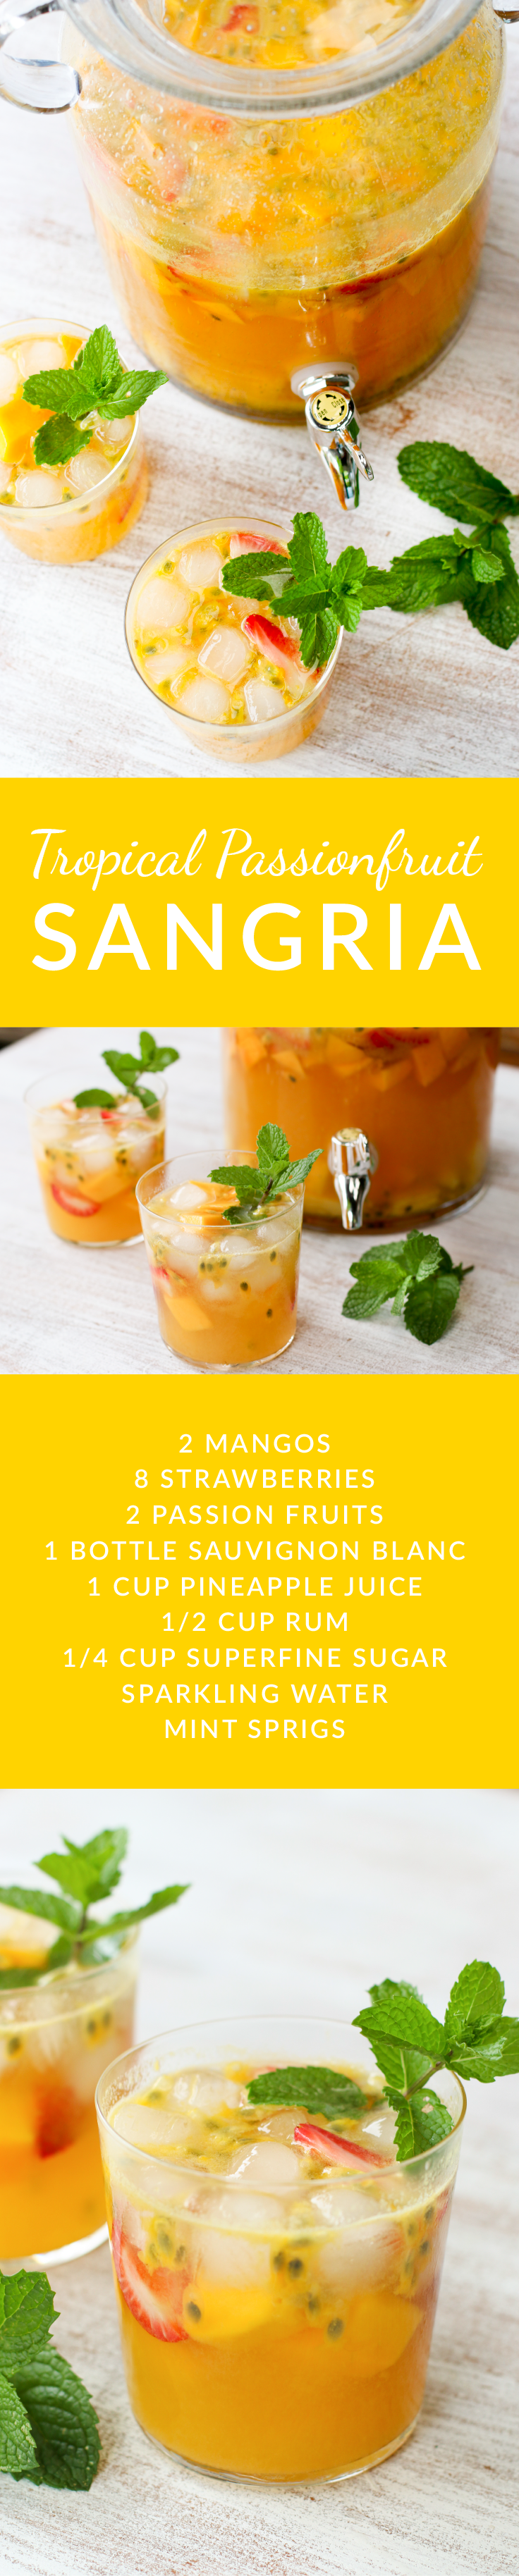 This light, but full-flavored sangria is reminiscent of the vacation of your dreams. Yes, it is that good. The perfect drink for a summer evening whether you are in Honolulu, Noosa, Mal Pais or your backyard.